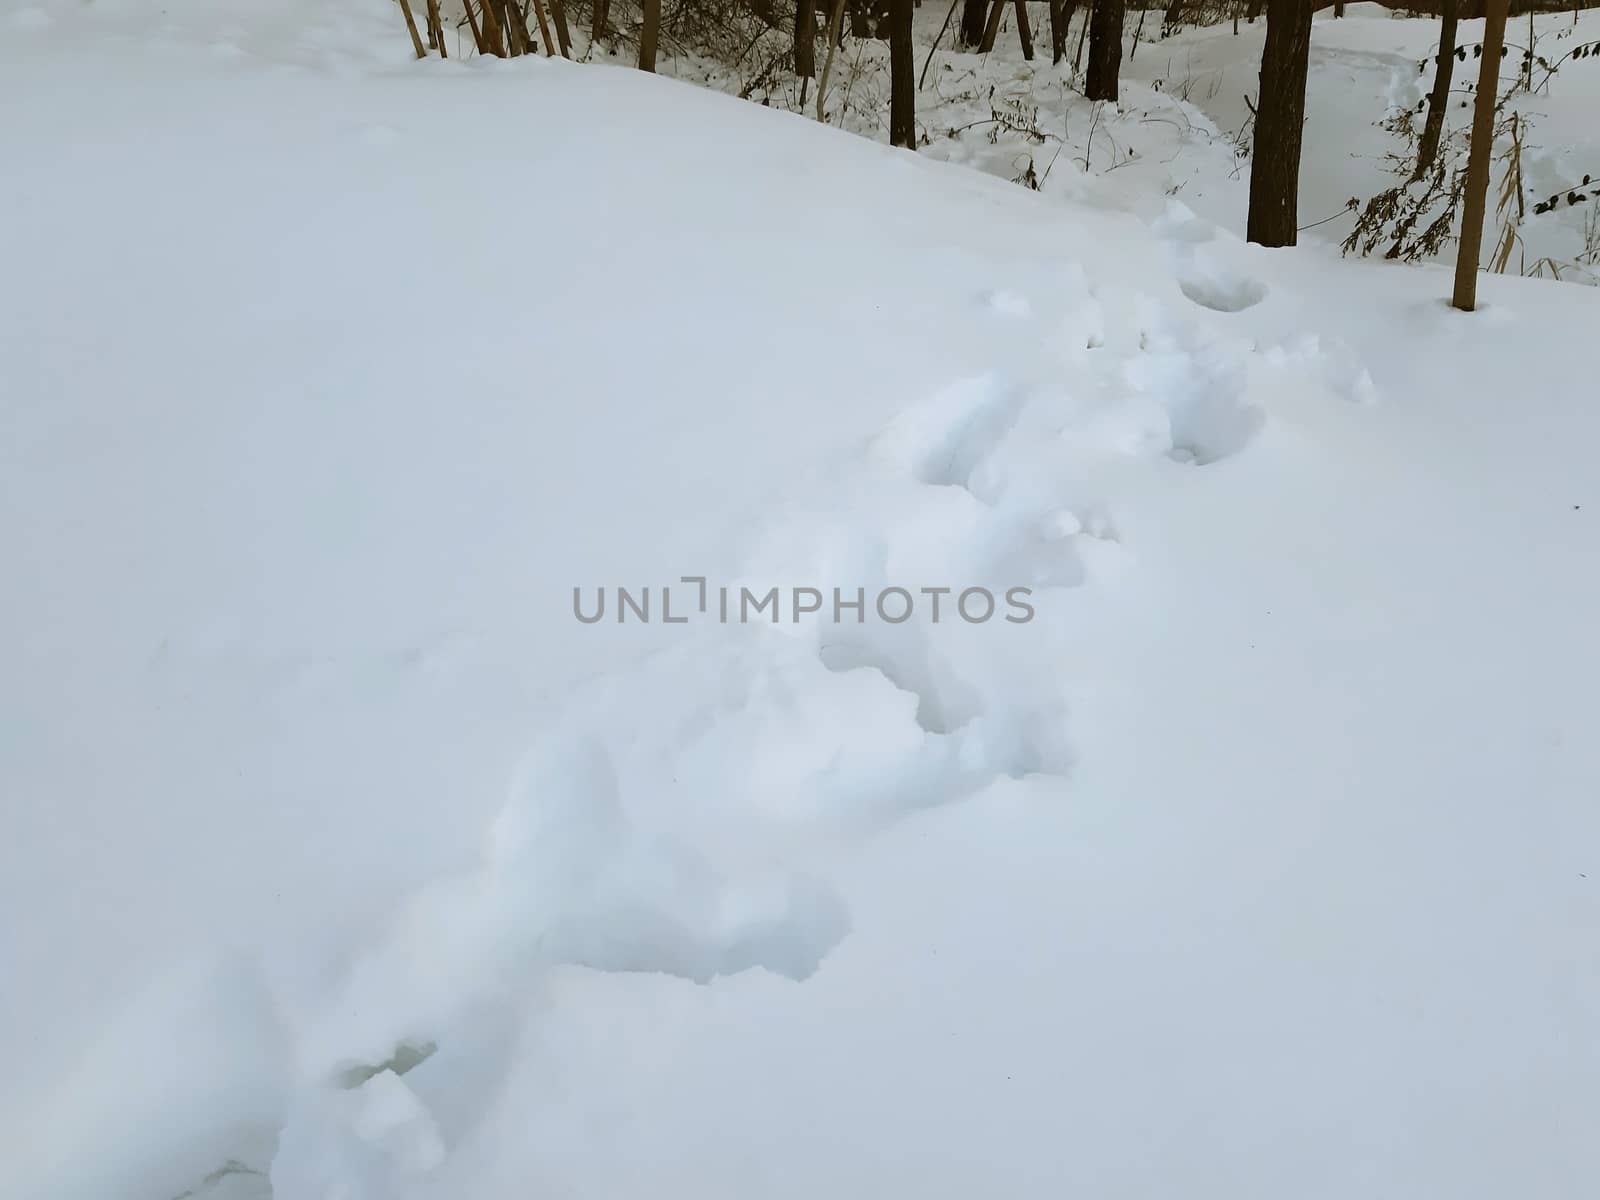 Human footprints in the snow close up by Mindru